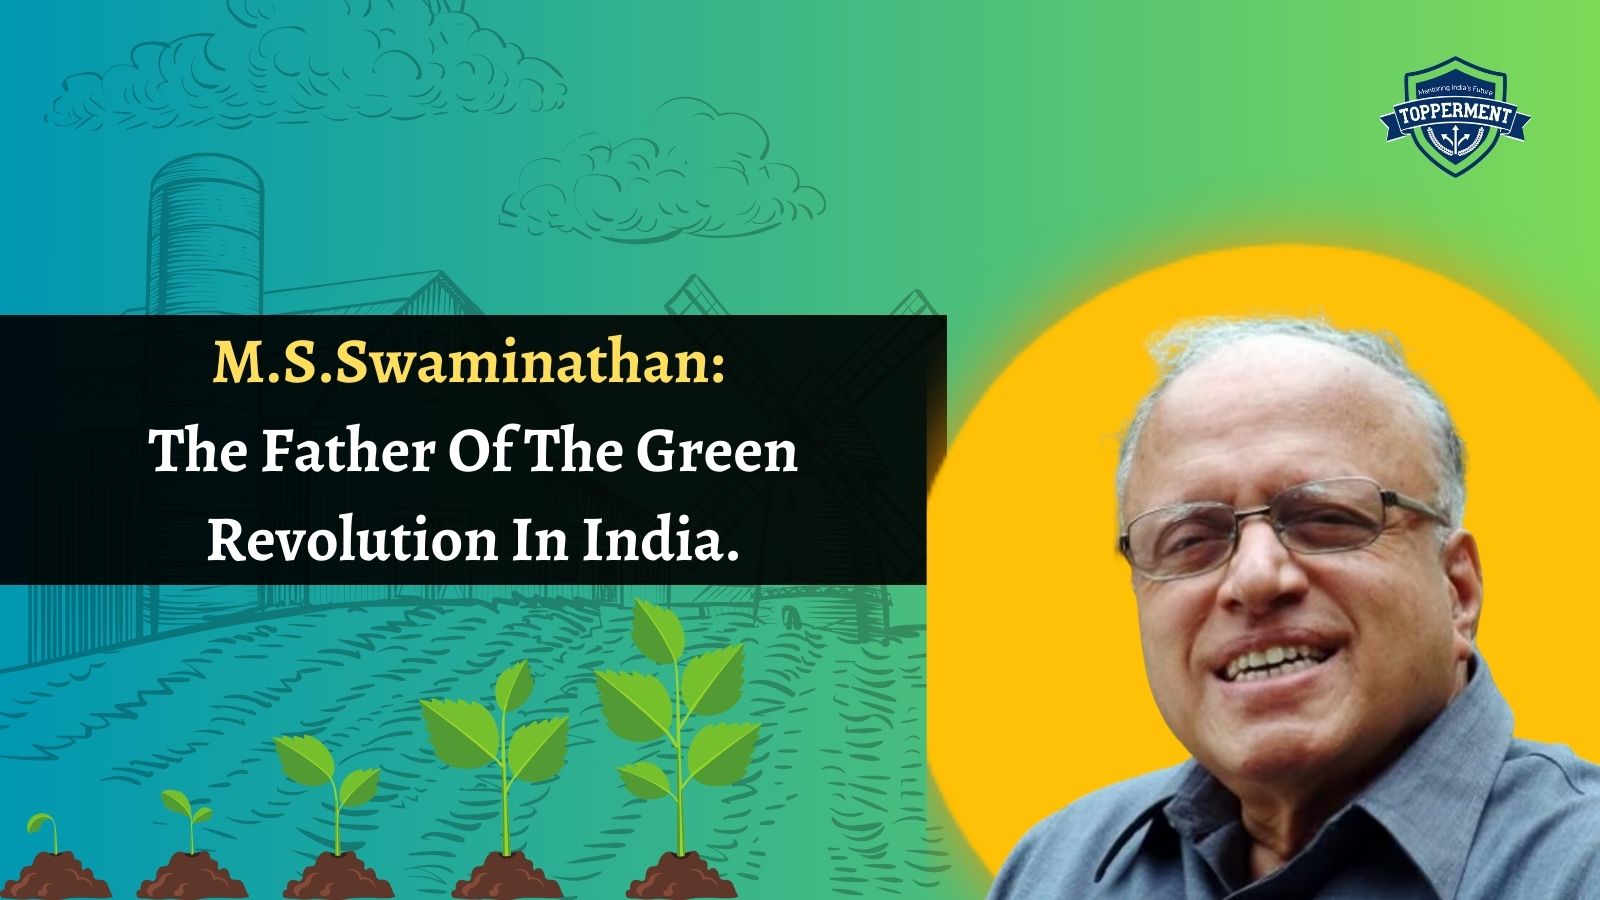 M.S.Swaminathan The Man Who Transformed India's Agriculture | Best UPSC IAS Coaching For Guidance And Mentorship